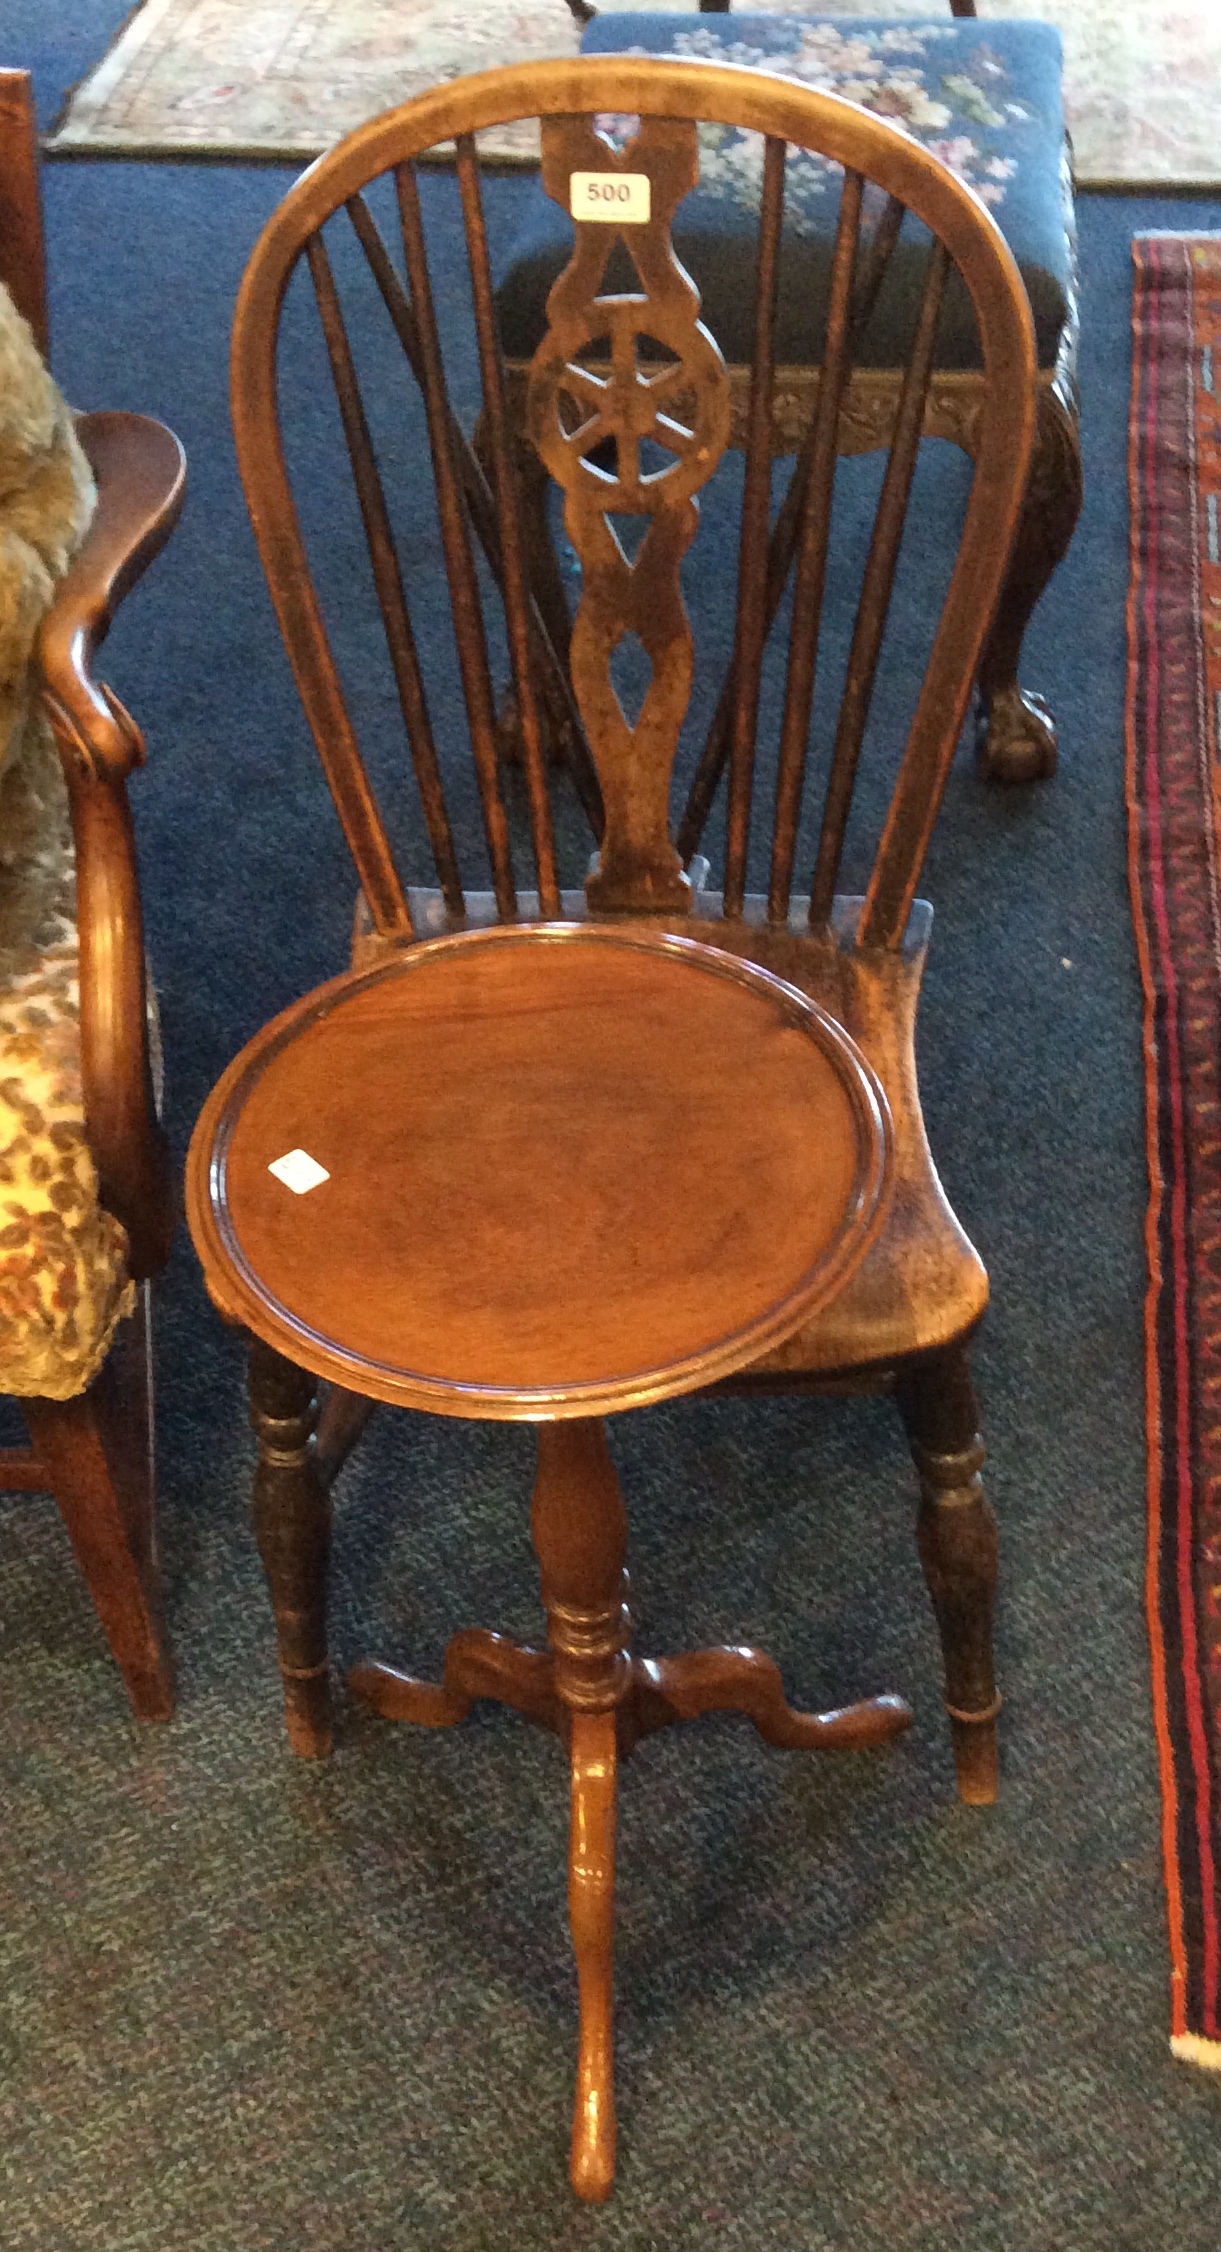 An 18th c single wheel back chair and a small occasional table